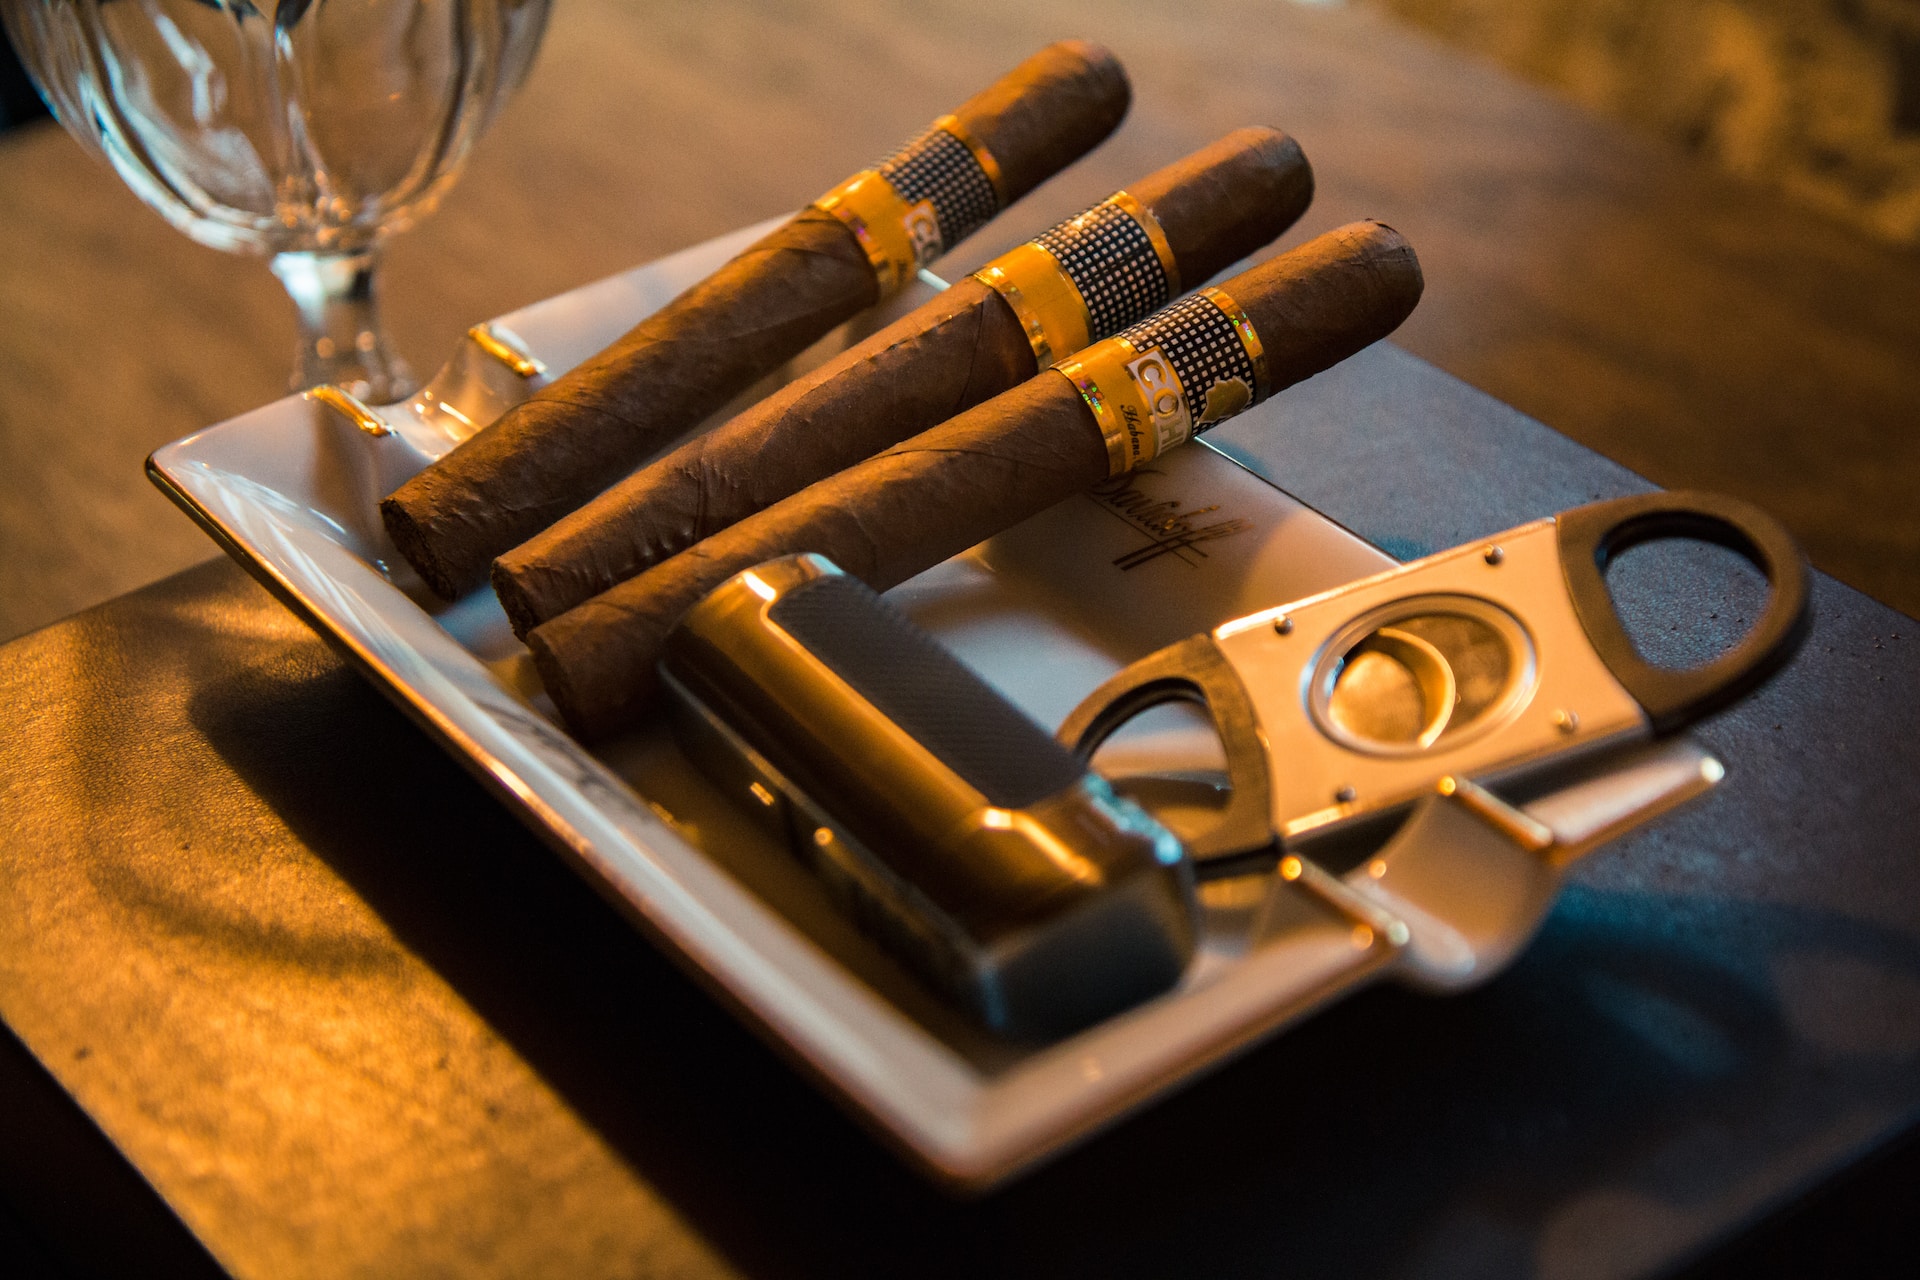 Where to find premium cigars in San Diego